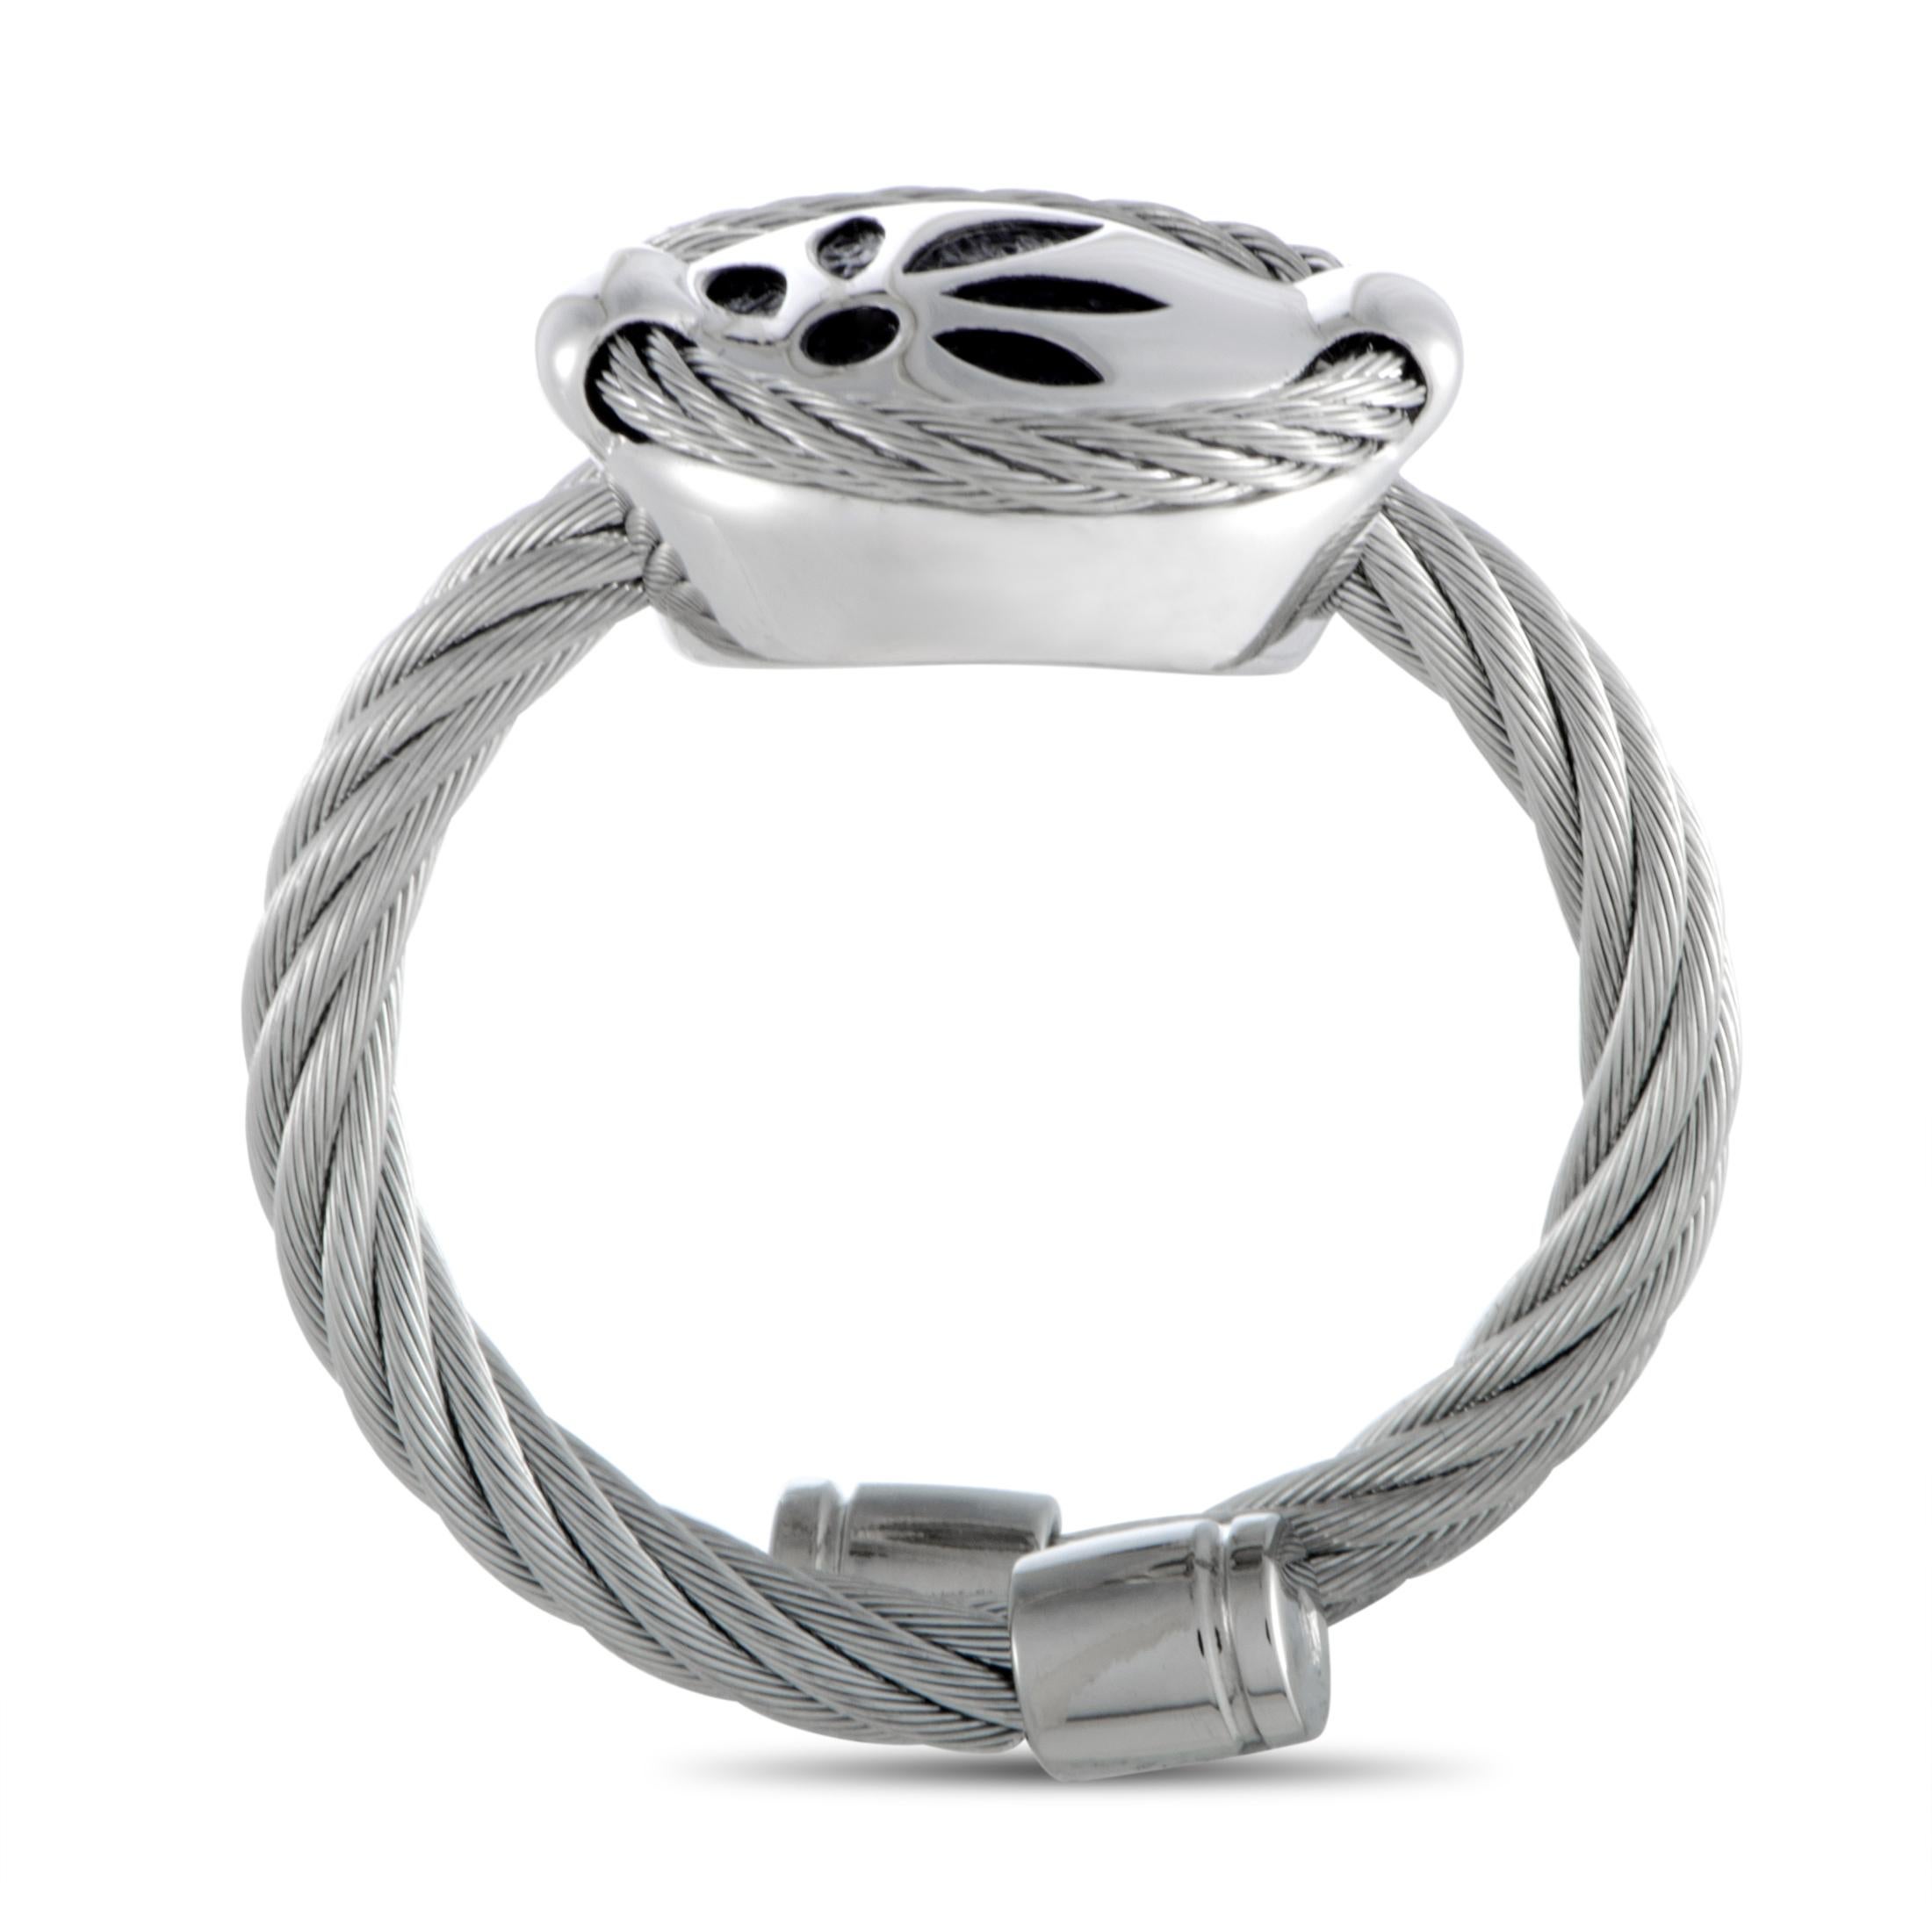 This exquisite “Bamboo” ring is presented by Charriol and it is designed in an incredibly offbeat fashion, boasting intriguing cable motif and beautiful bamboo leaves-inspired décor. The ring is crafted from stainless steel.
 Ring Top Dimensions: